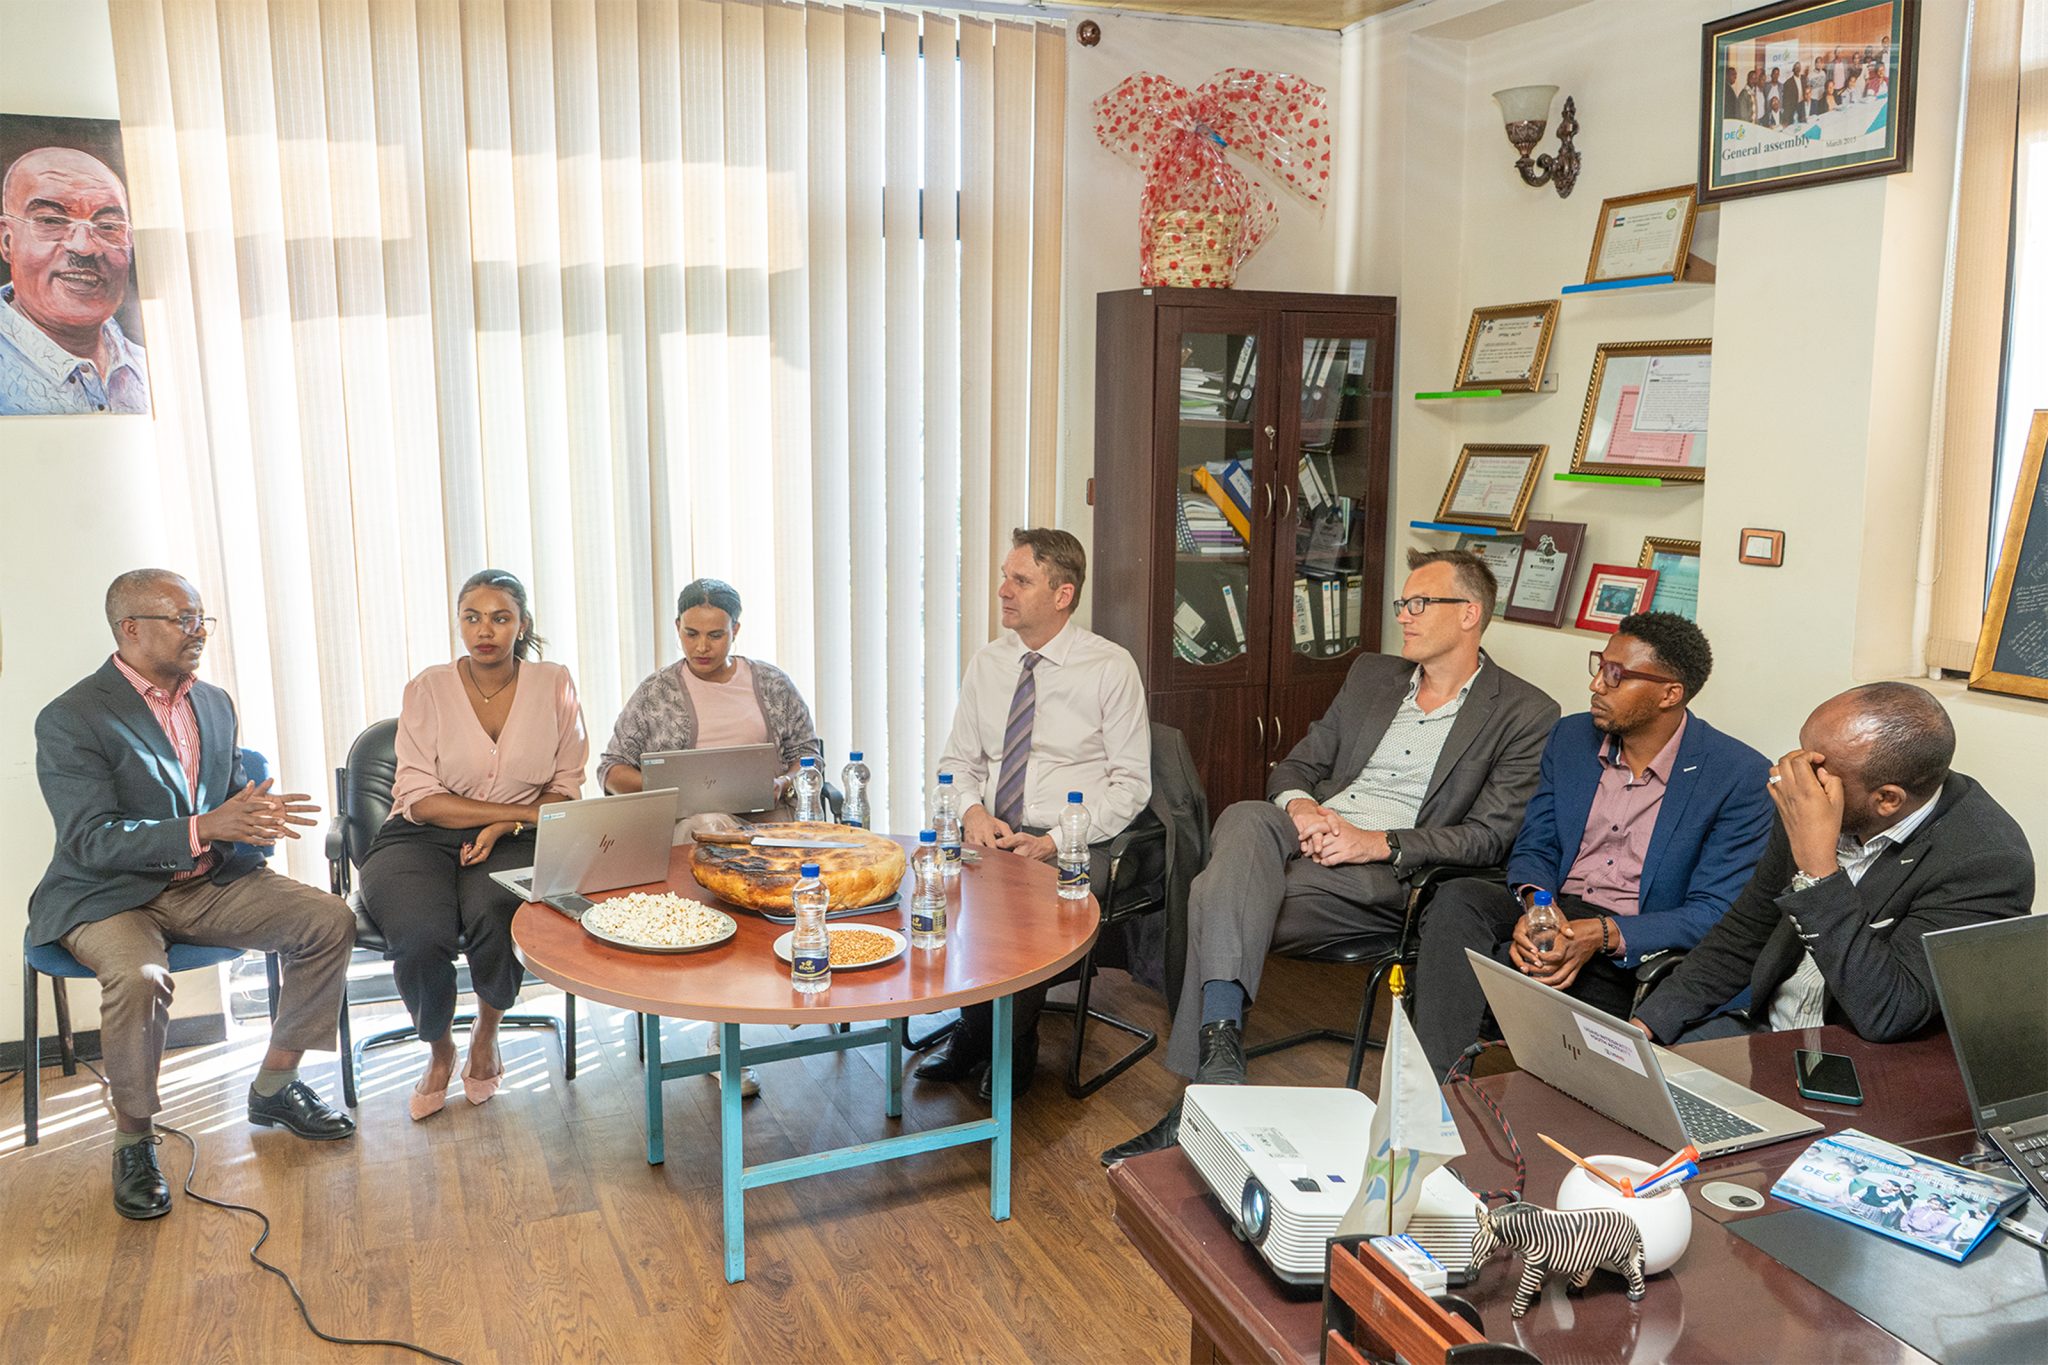 Embassy of The Kingdom of Netherlands Visits Our Organization to Strengthen Support and Collaboration